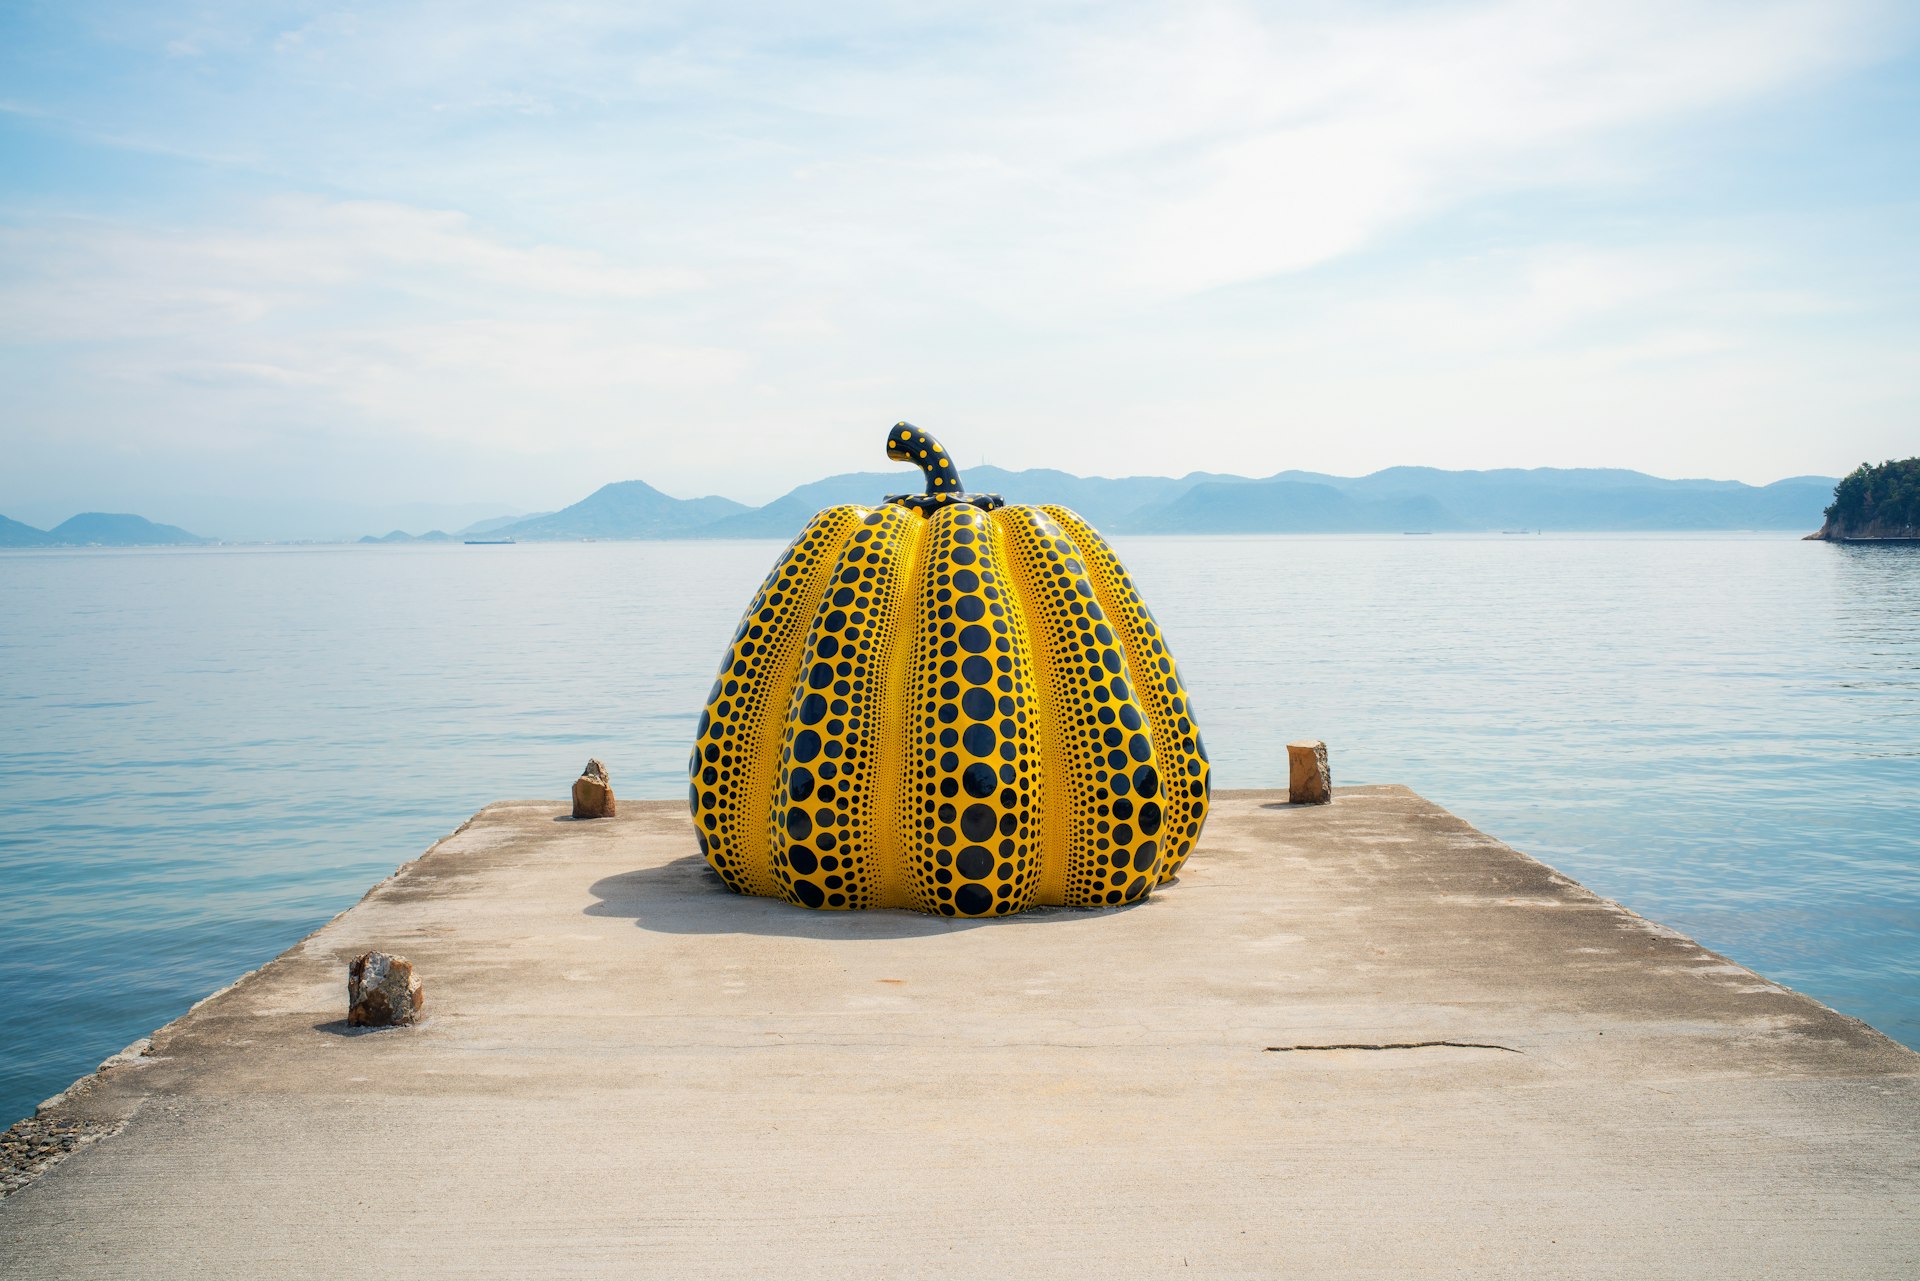 Yayoi Kusama's giant pumpkin sculpture in front of the sea. 